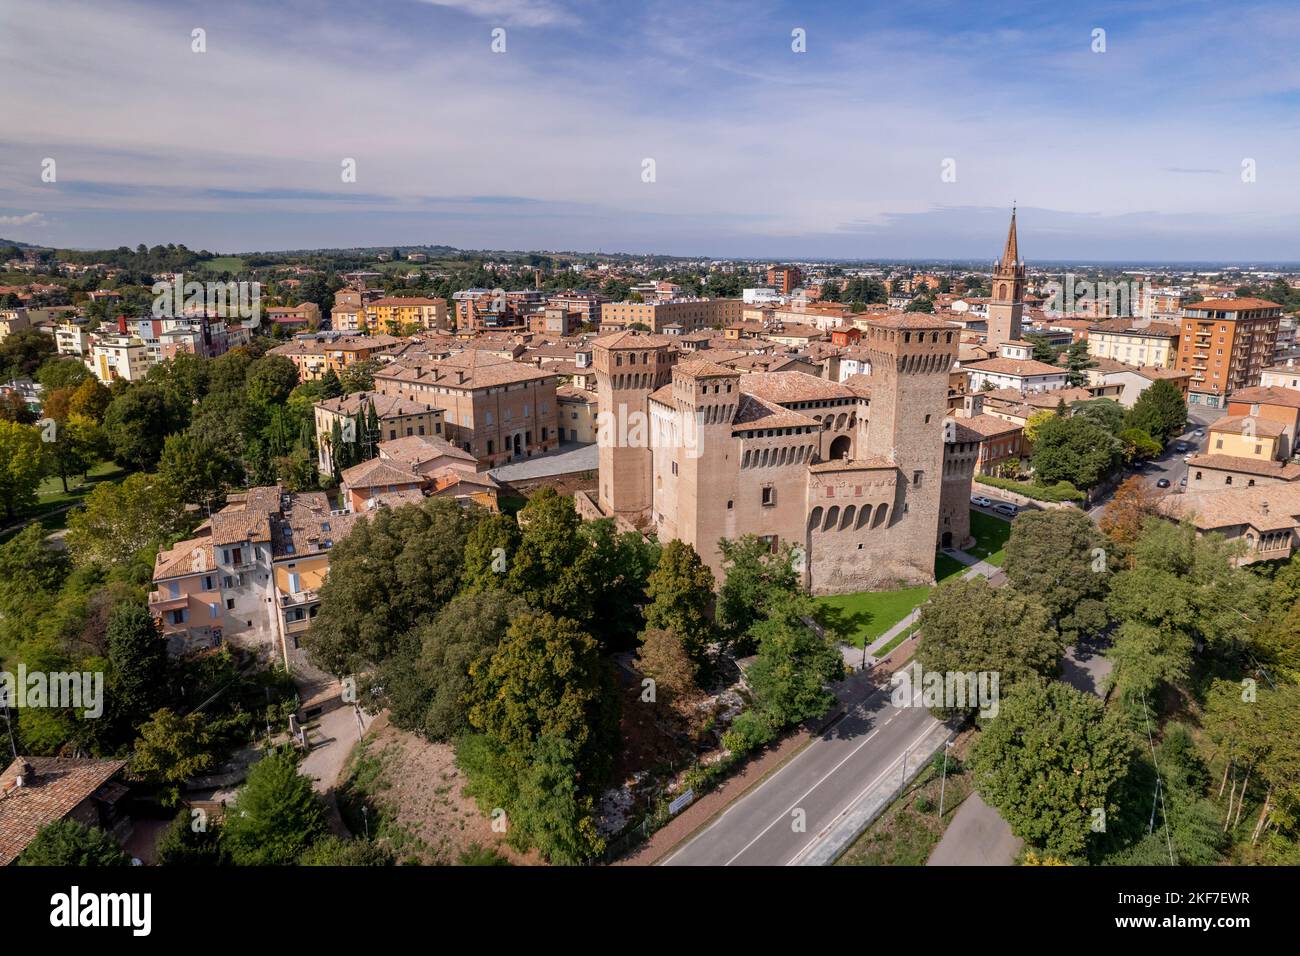 Lateral view of Castle of Vignola in Emilia Romagna region in Italy on a sunny day with blue sky and green surroundings Stock Photo